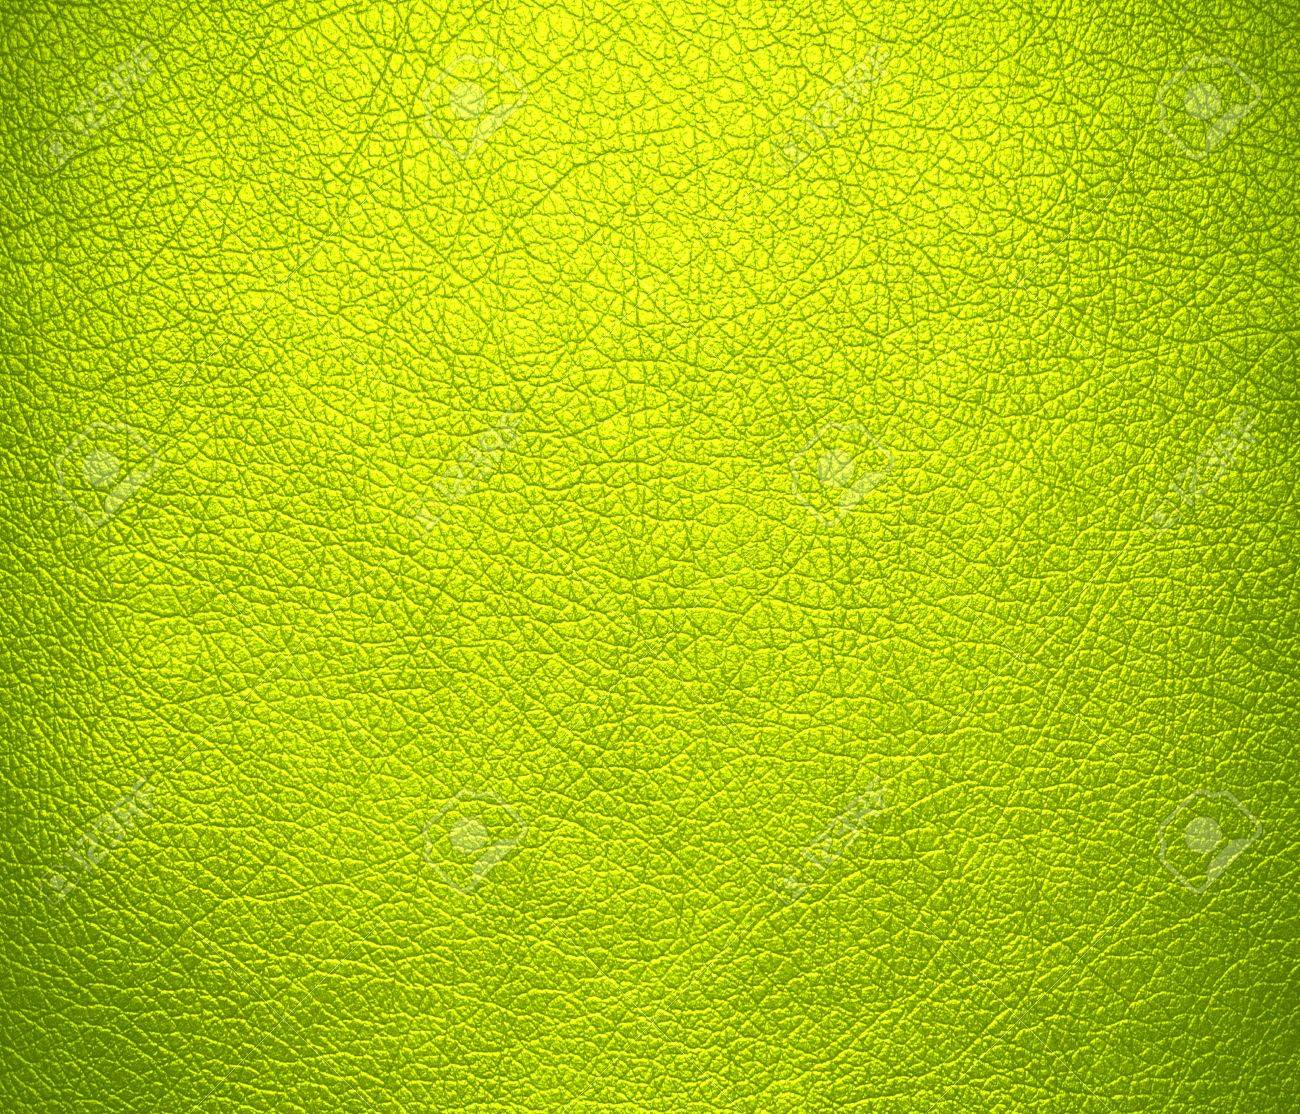 Chartreuse Traditional Leather Texture Background Stock Photo